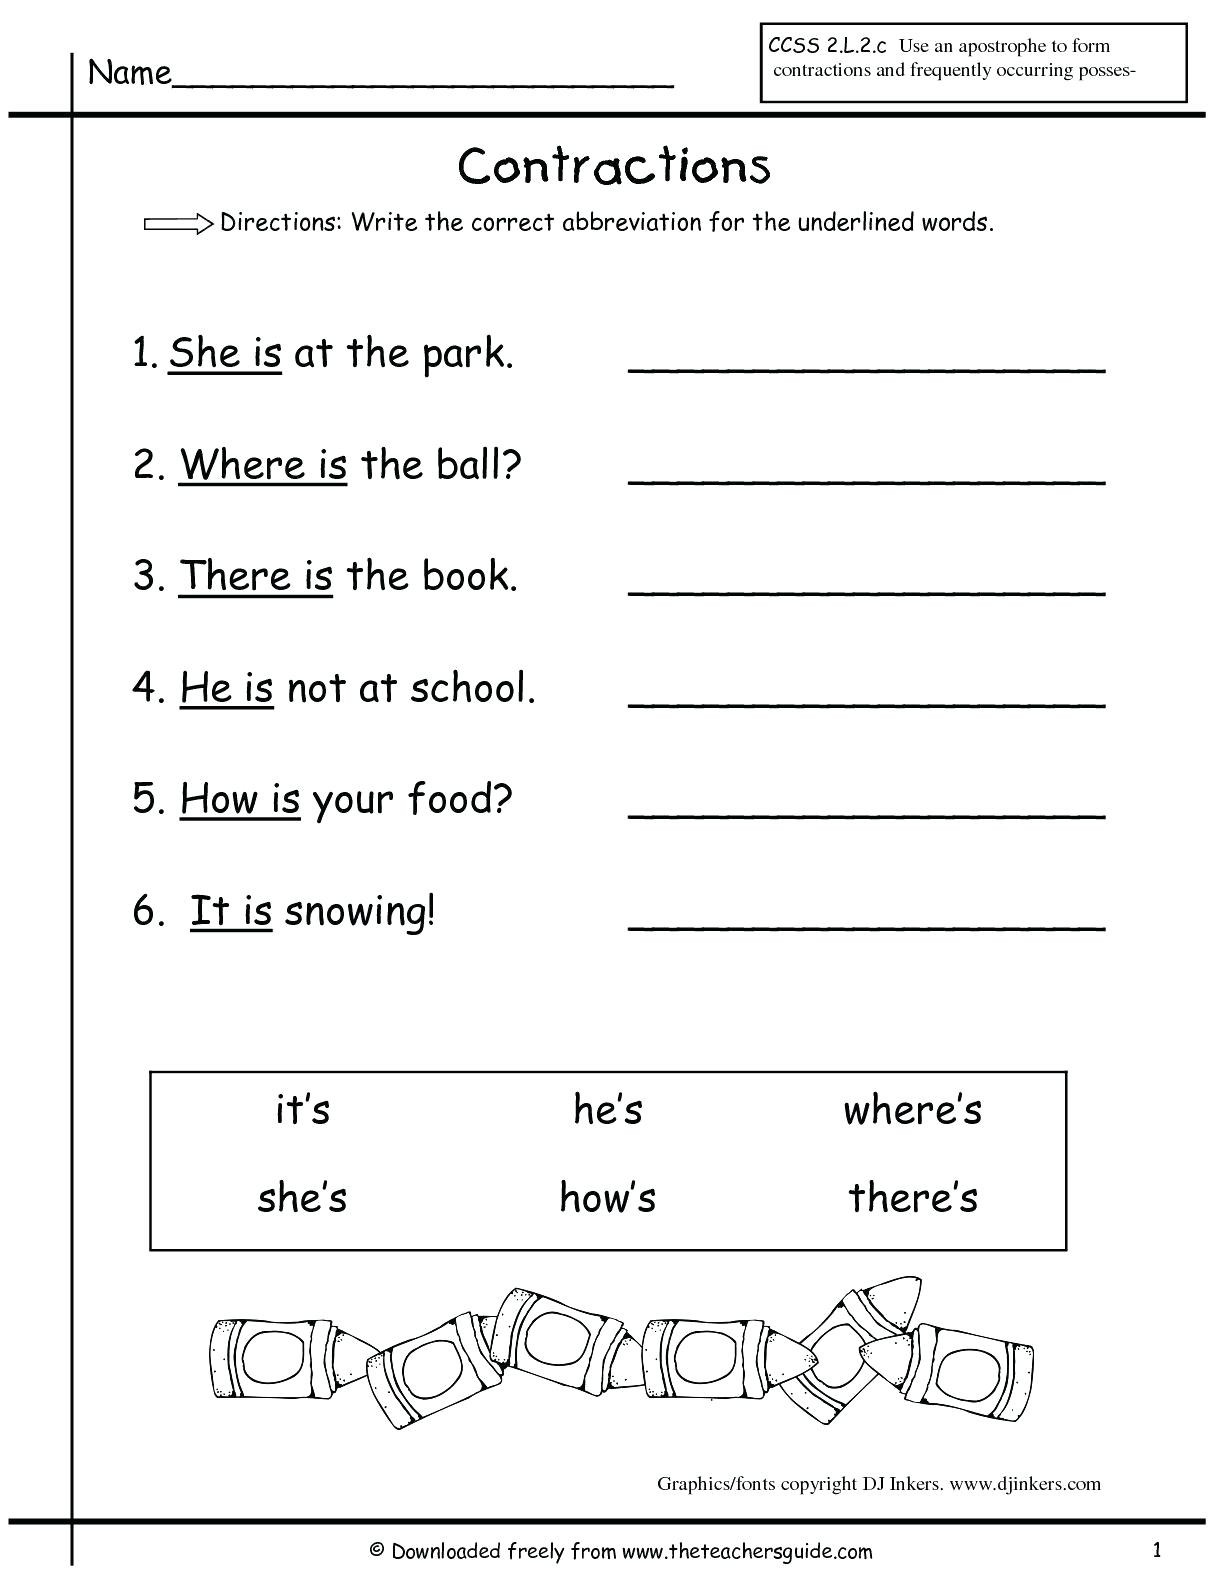 Science Worksheets for 7th Grade 7th Grade Science Worksheets Pdf Grade Science Worksheets